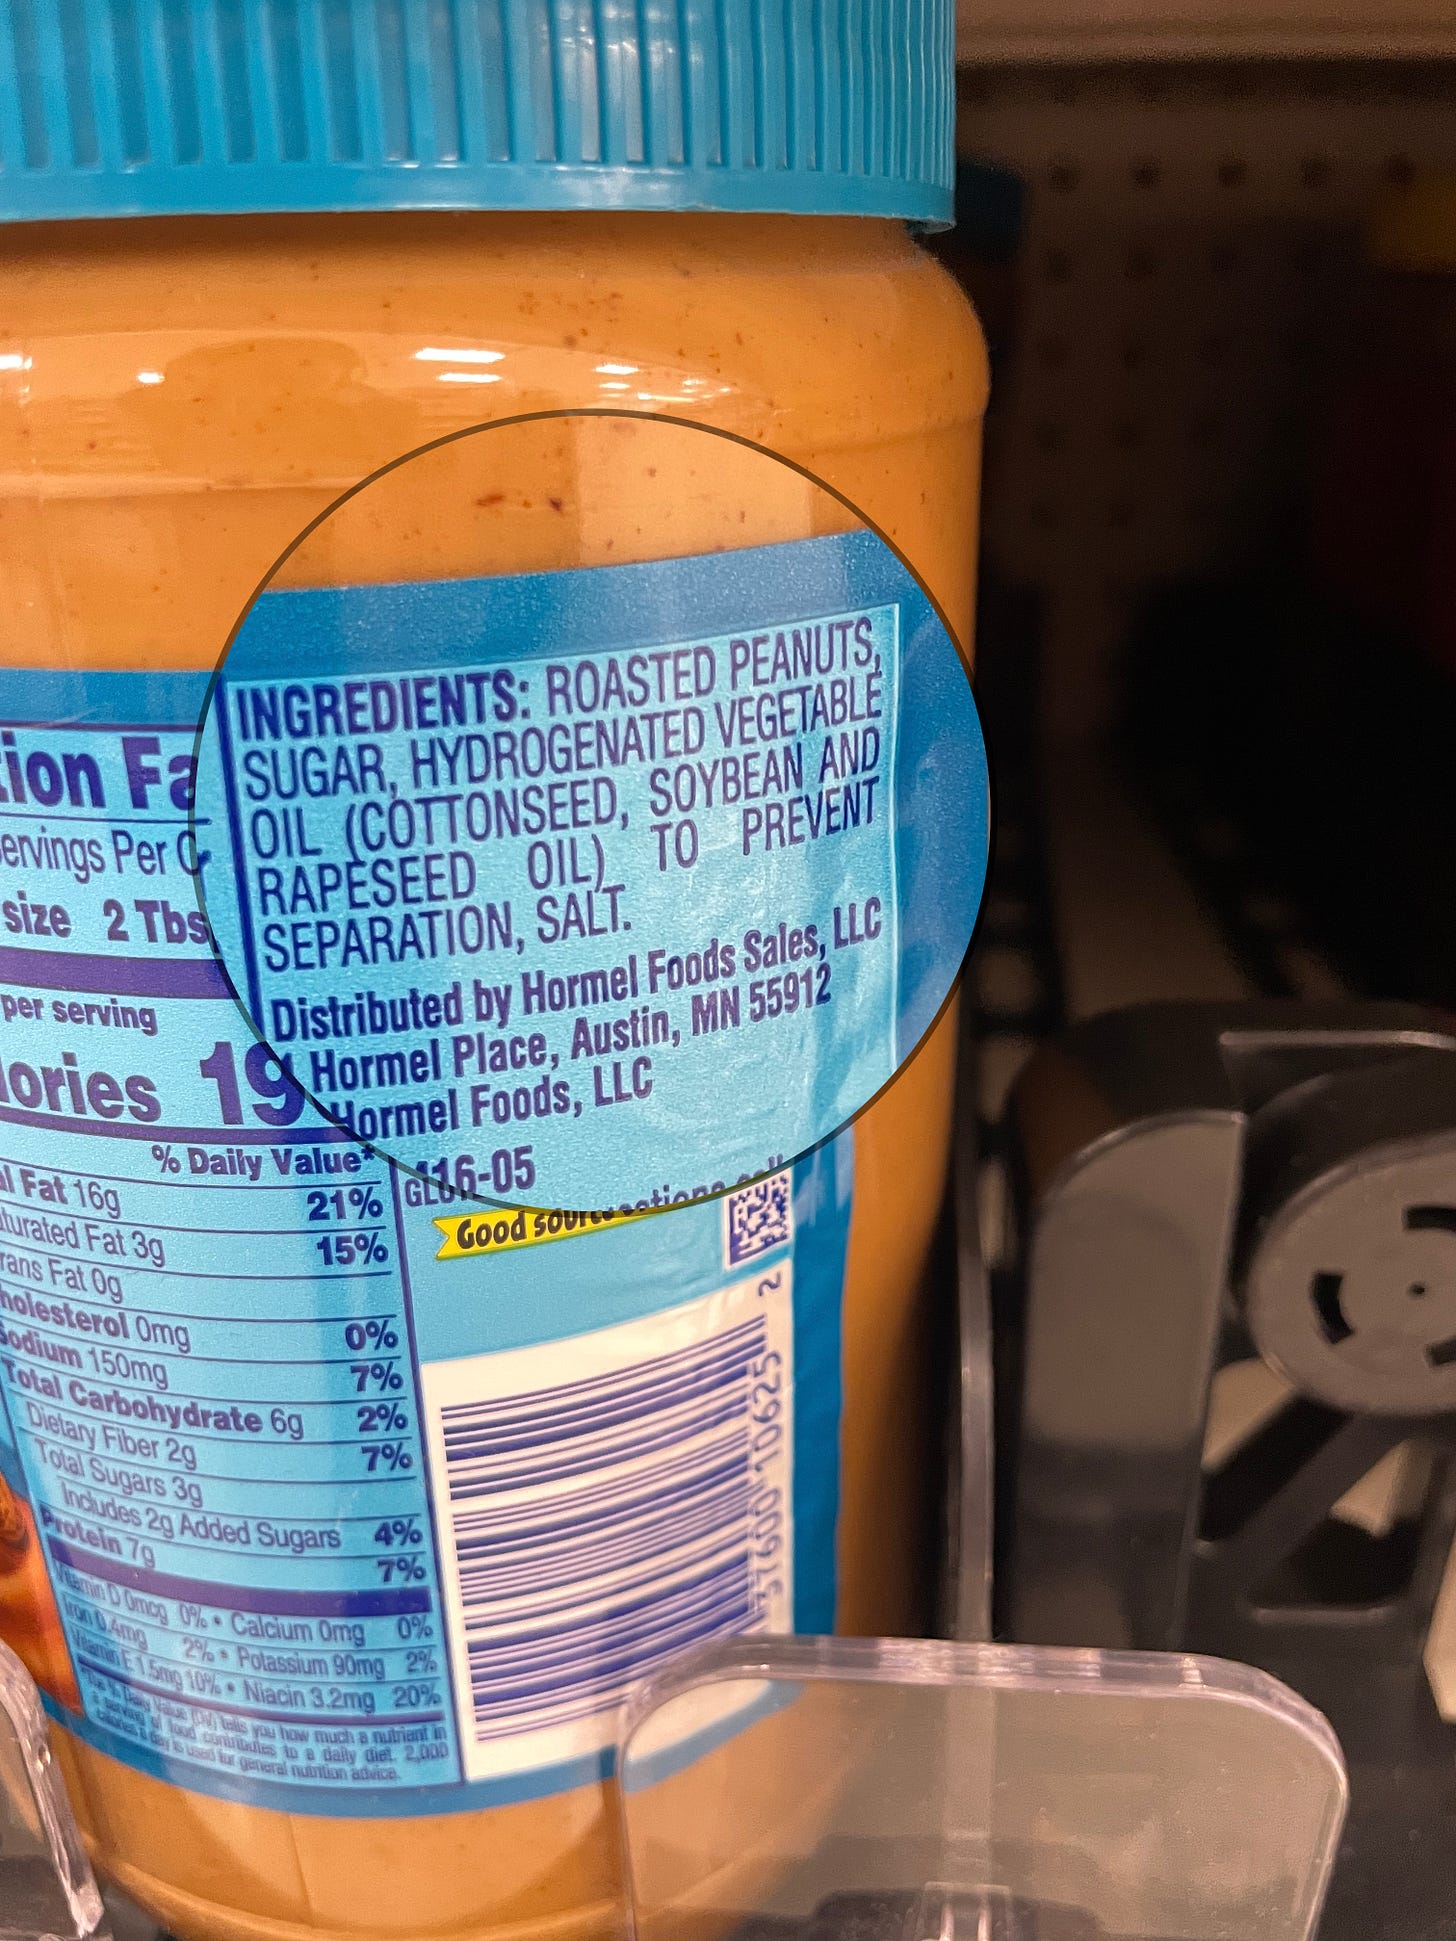 Peanut butter label highlighting ingredients